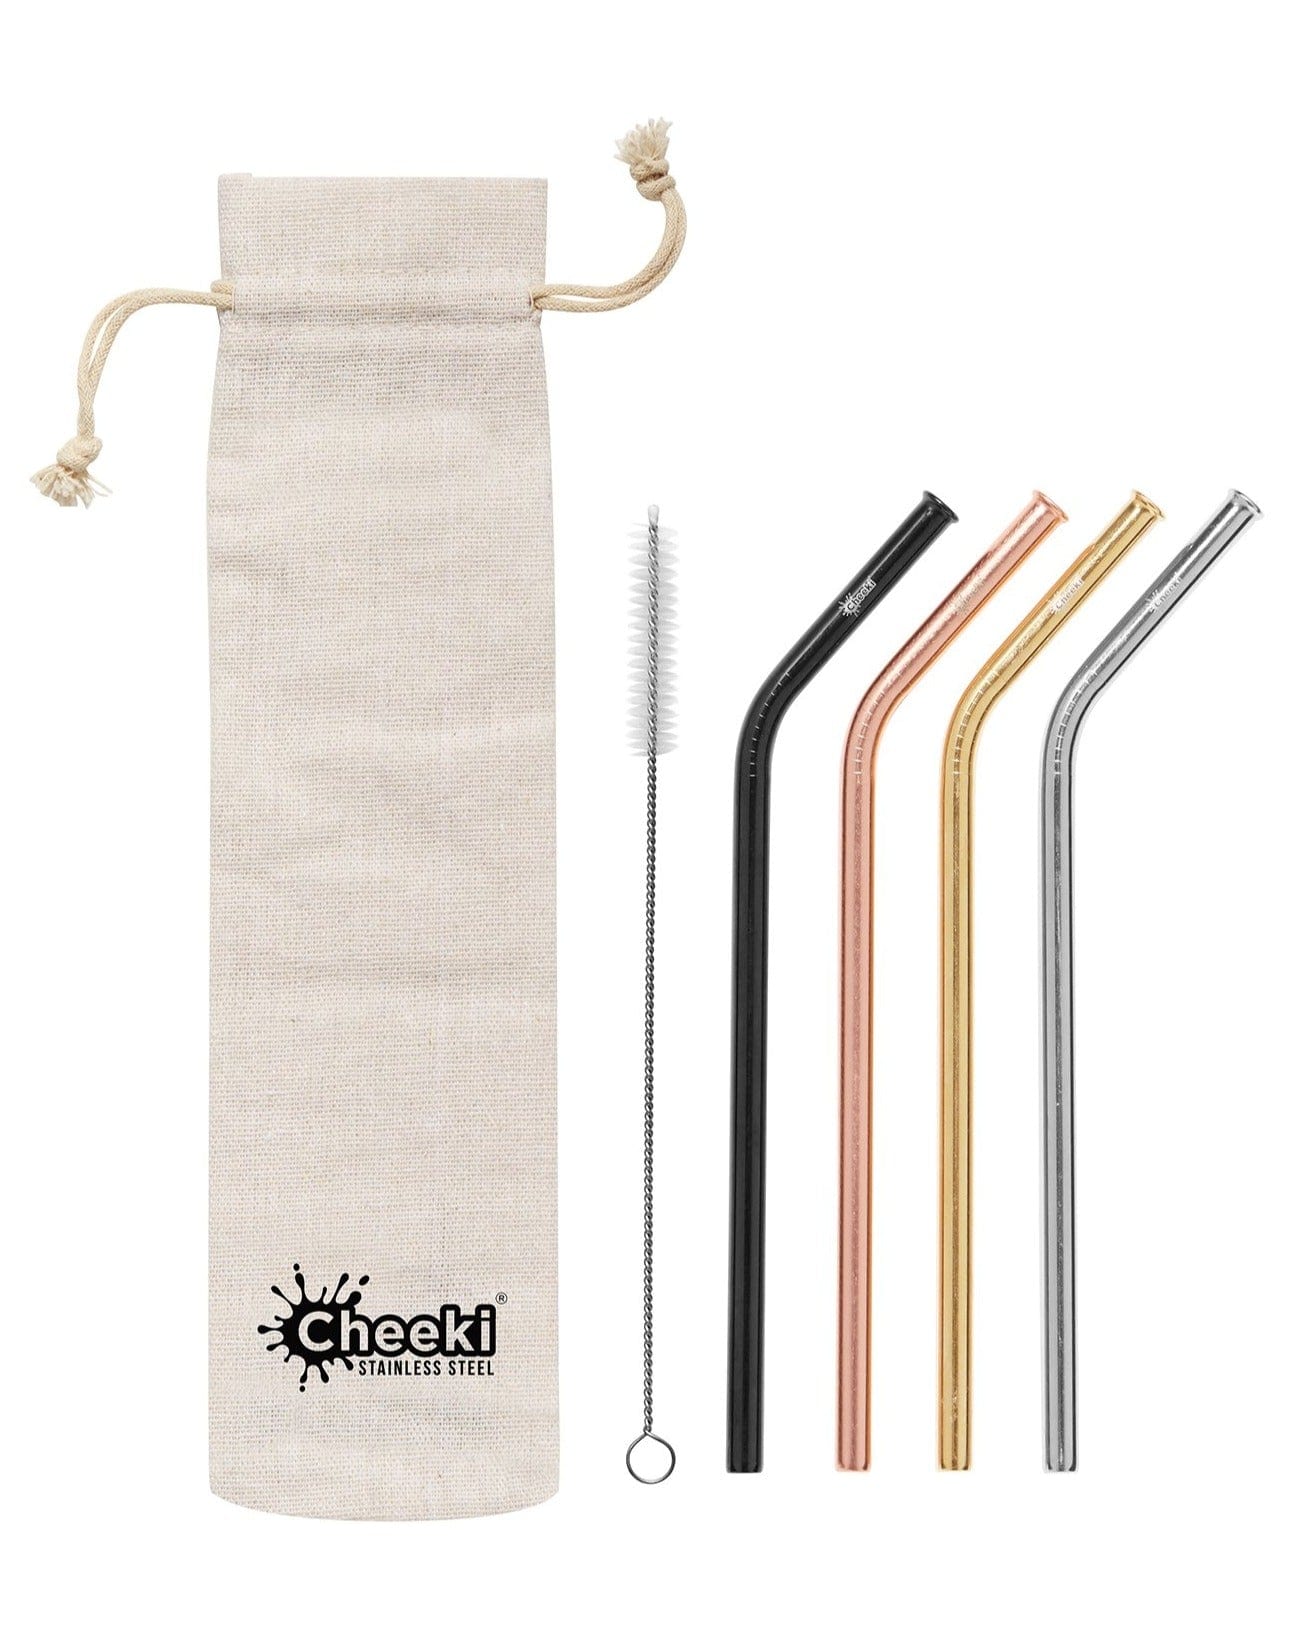 4 Pack Bent Stainless Steel Straws - Assorted Colours with Cleaning Brush + Bag